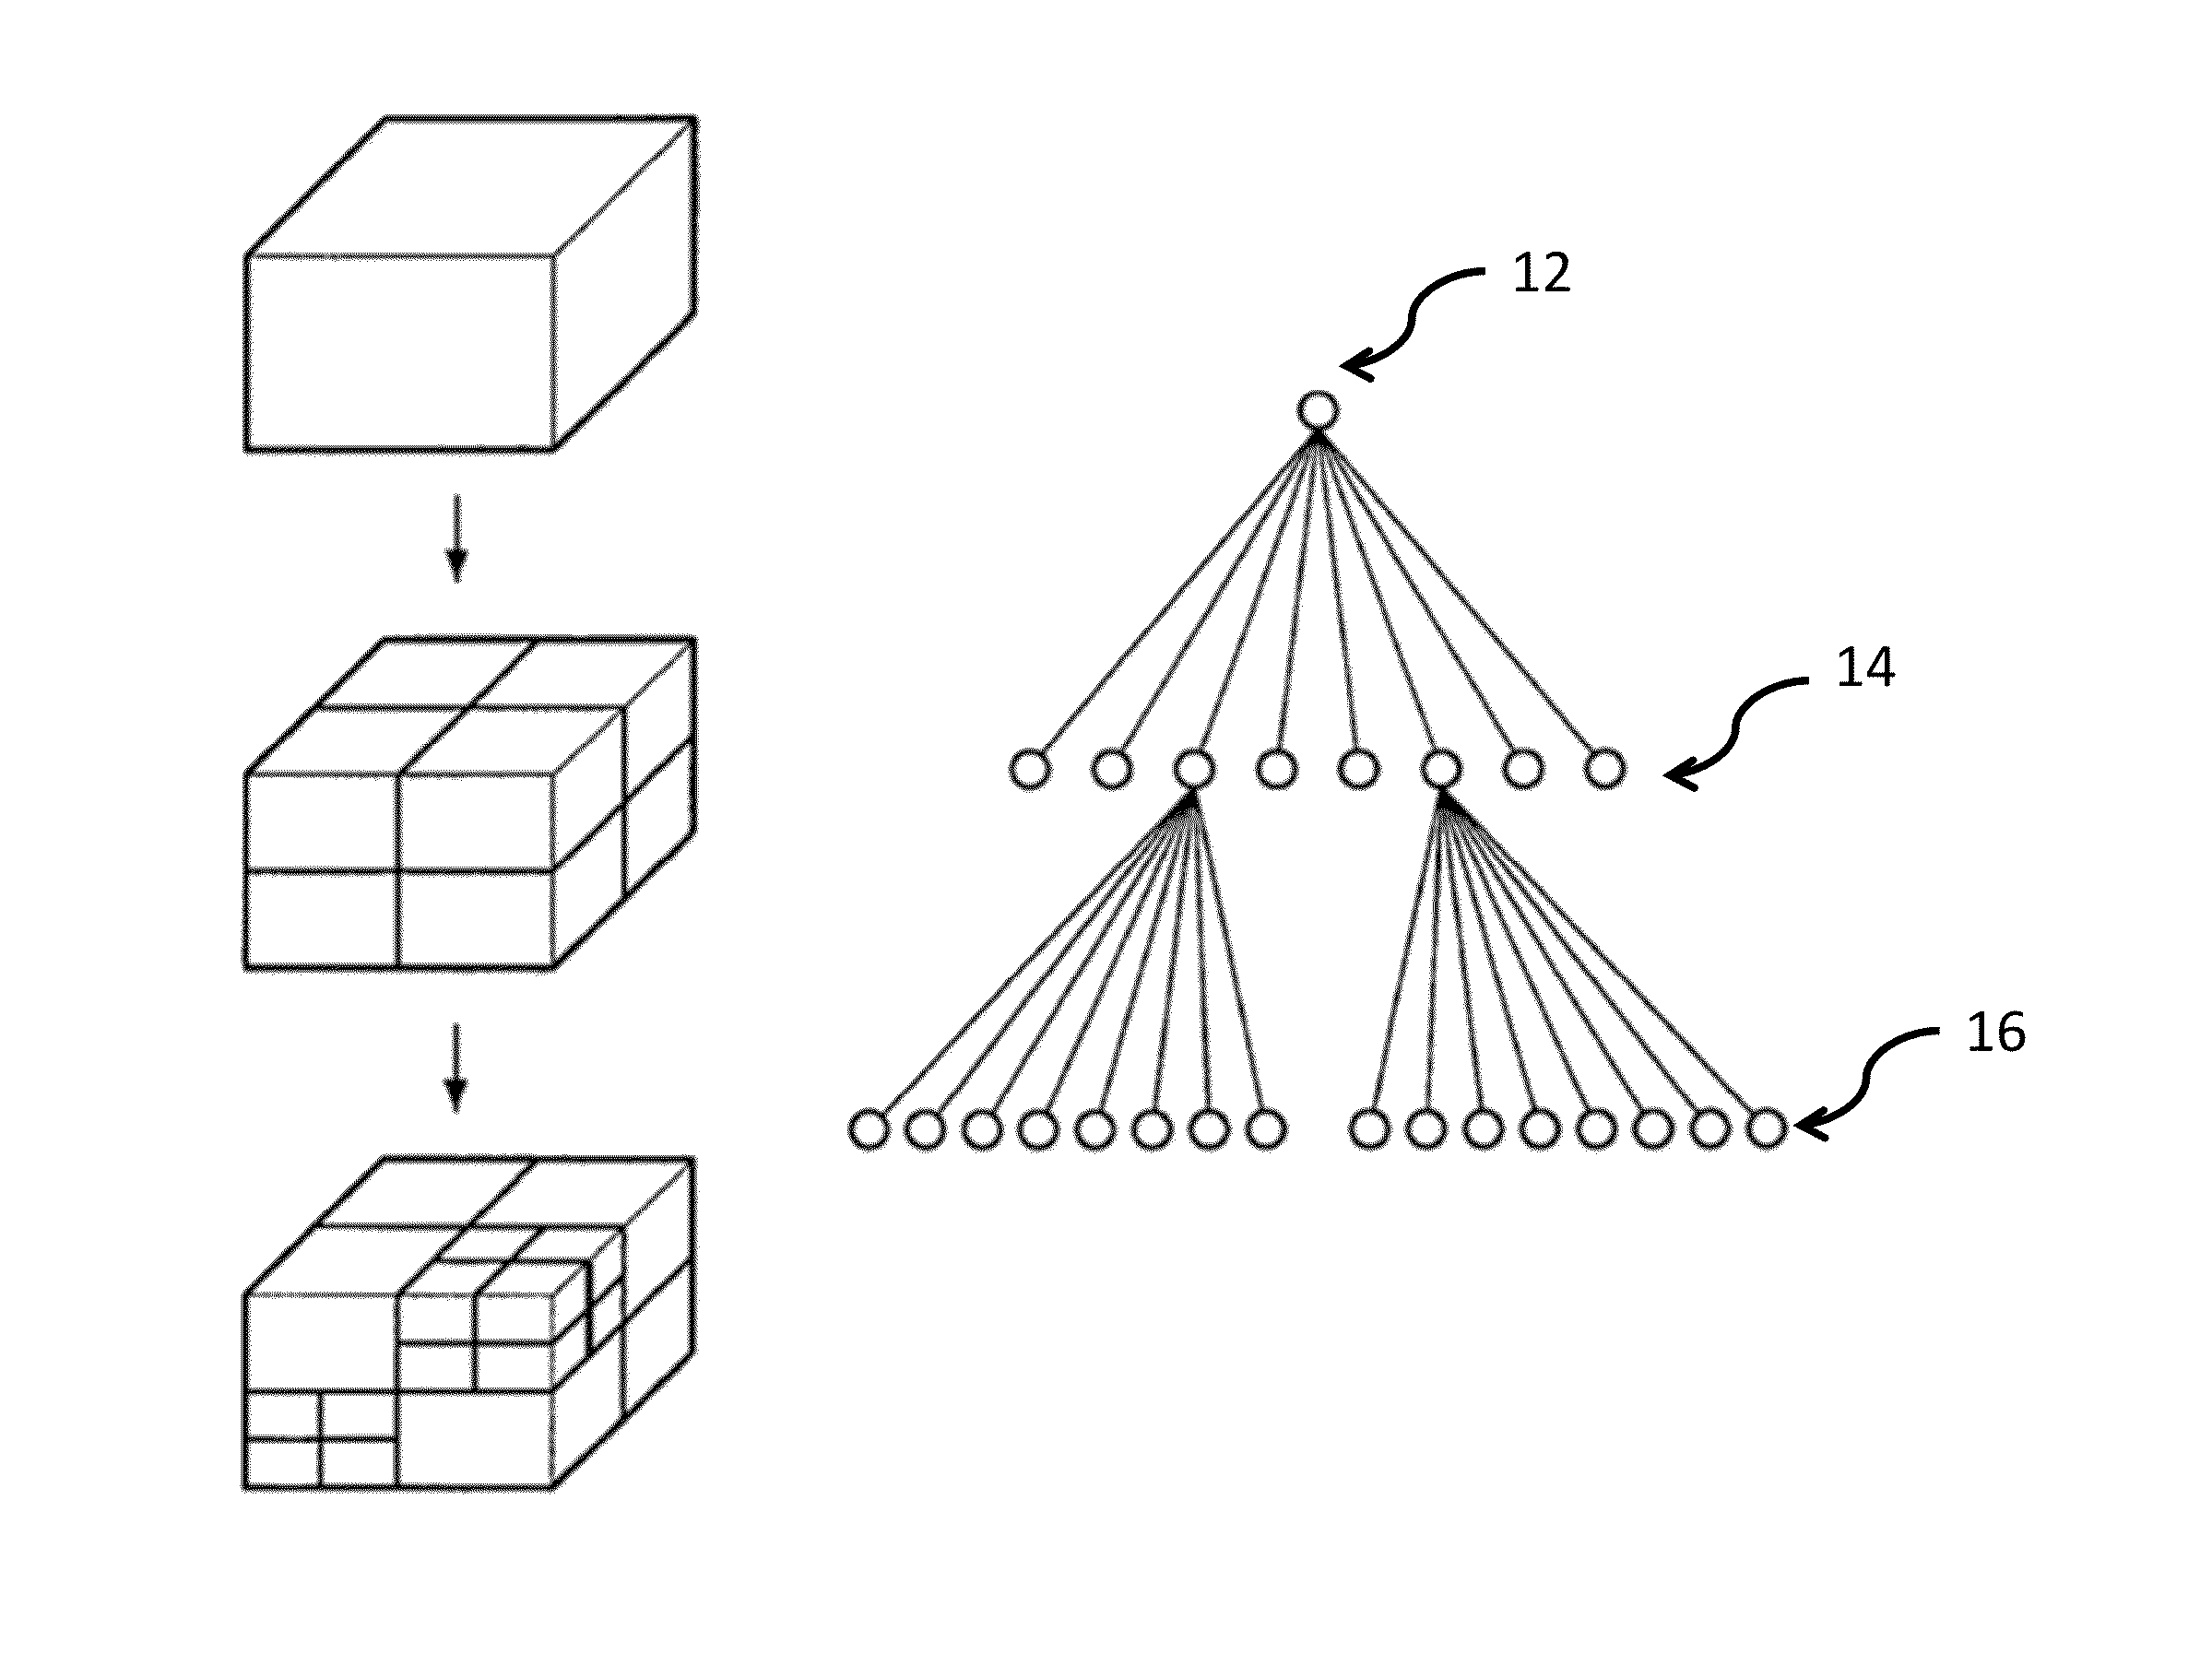 Systems and Methods for Indexing and Retrieving Images